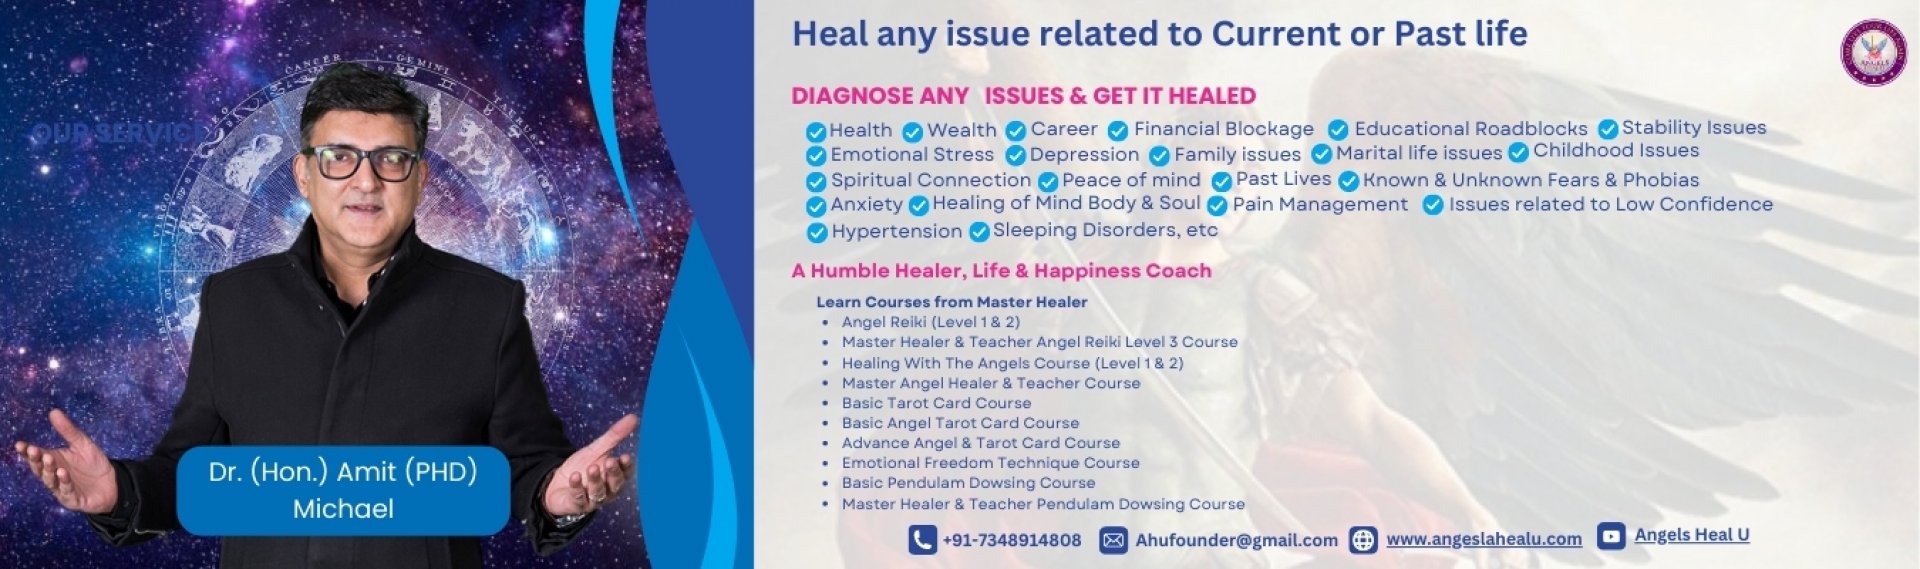 Heal any issue Related to Current or Past Life	